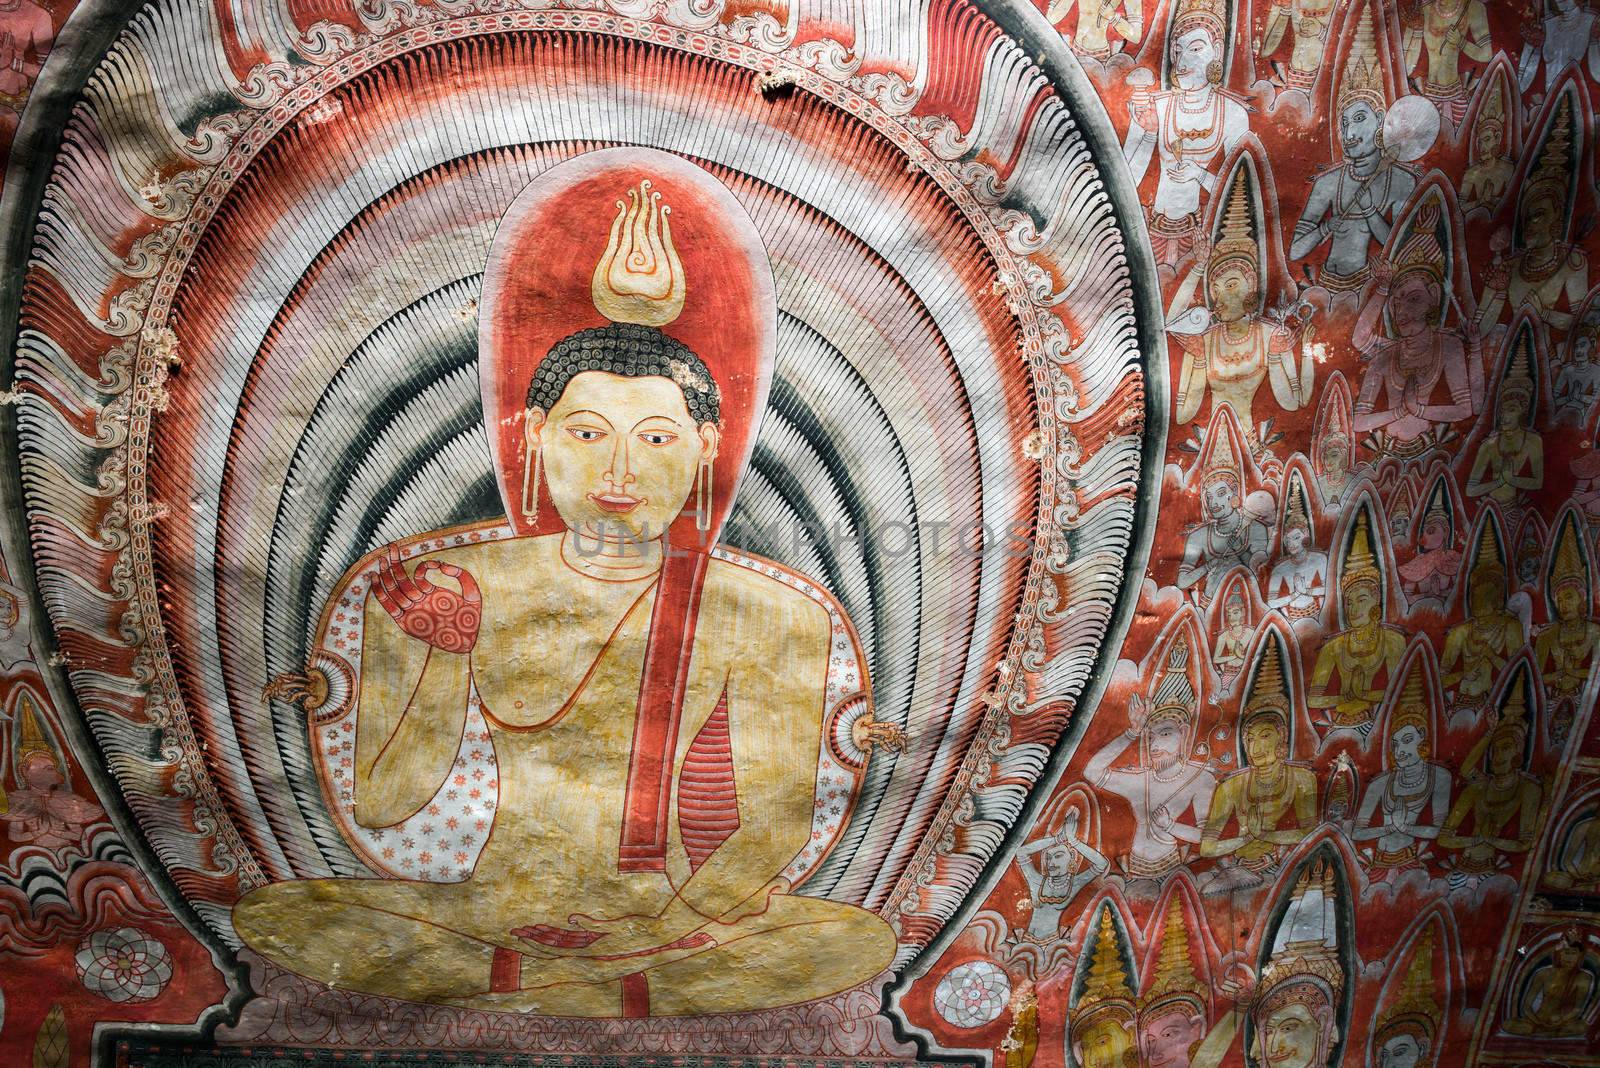 Valuable tempera paintings with Buddha image on the cave ceiling dating from the 18th century in Dambulla Cave Temple, Sri Lanka